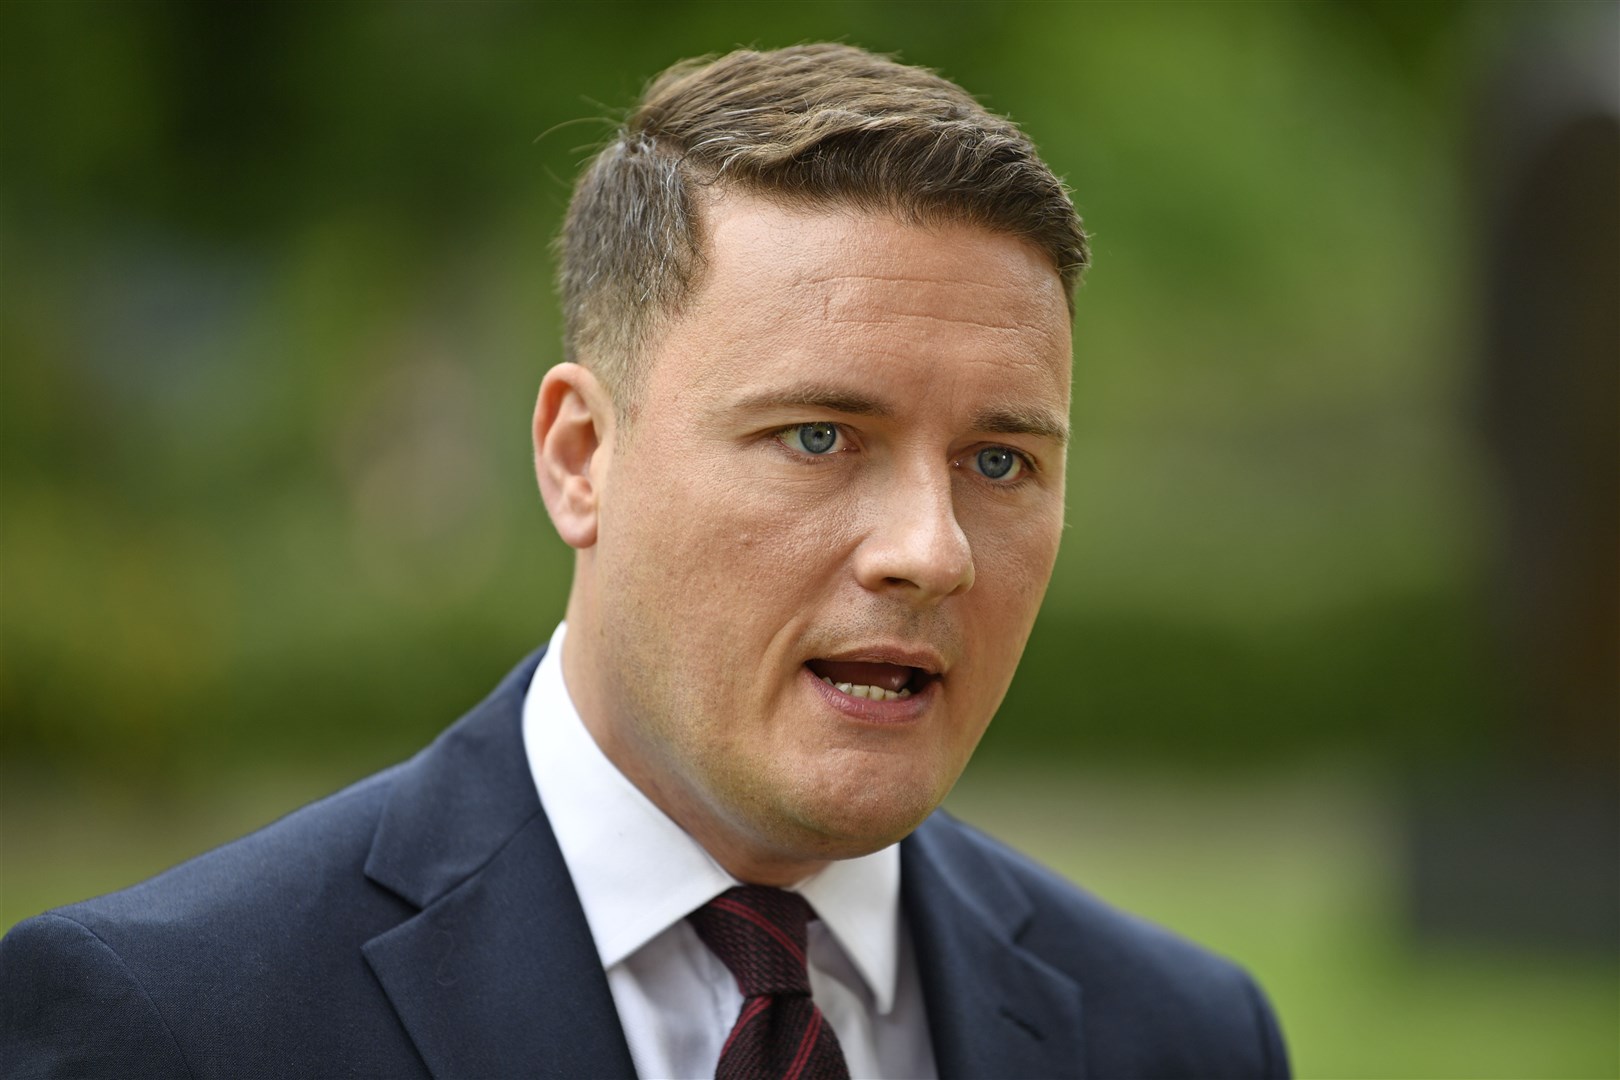 Labour’s Wes Streeting warned of a waste of taxpayers’ money (Beresford Hodge/PA)